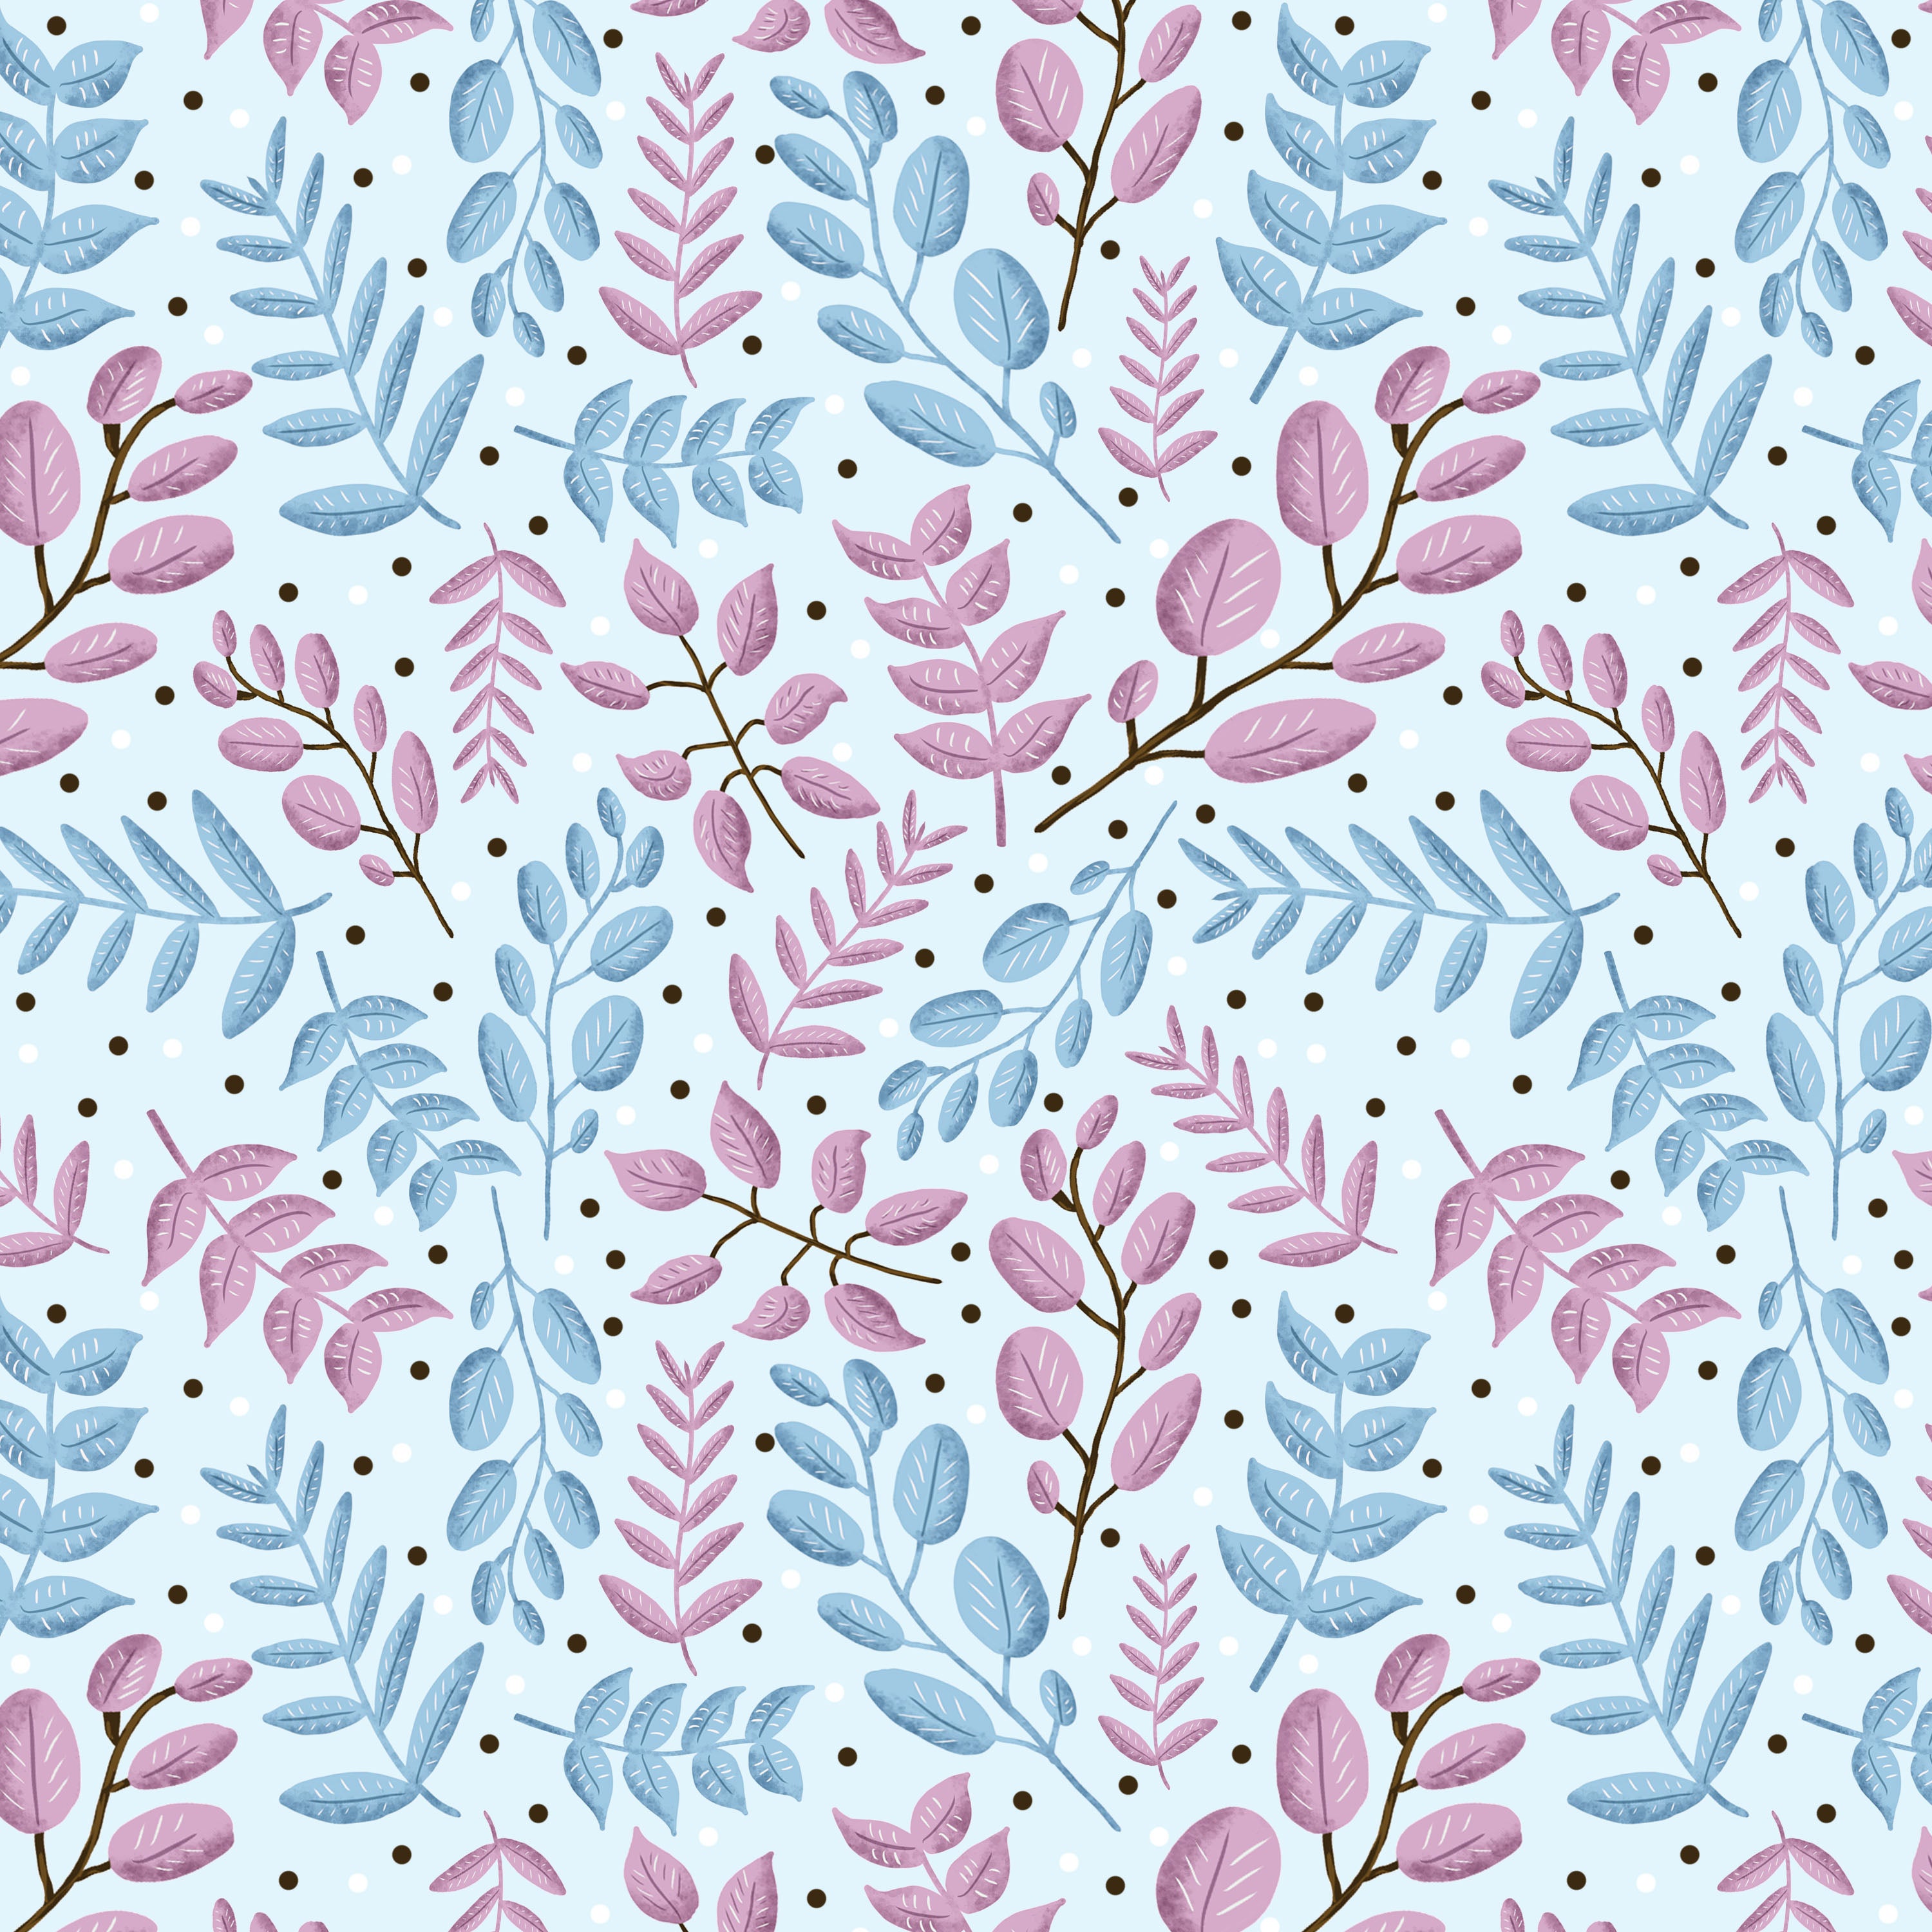 cute leafy surface pattern design as a seamless repeat